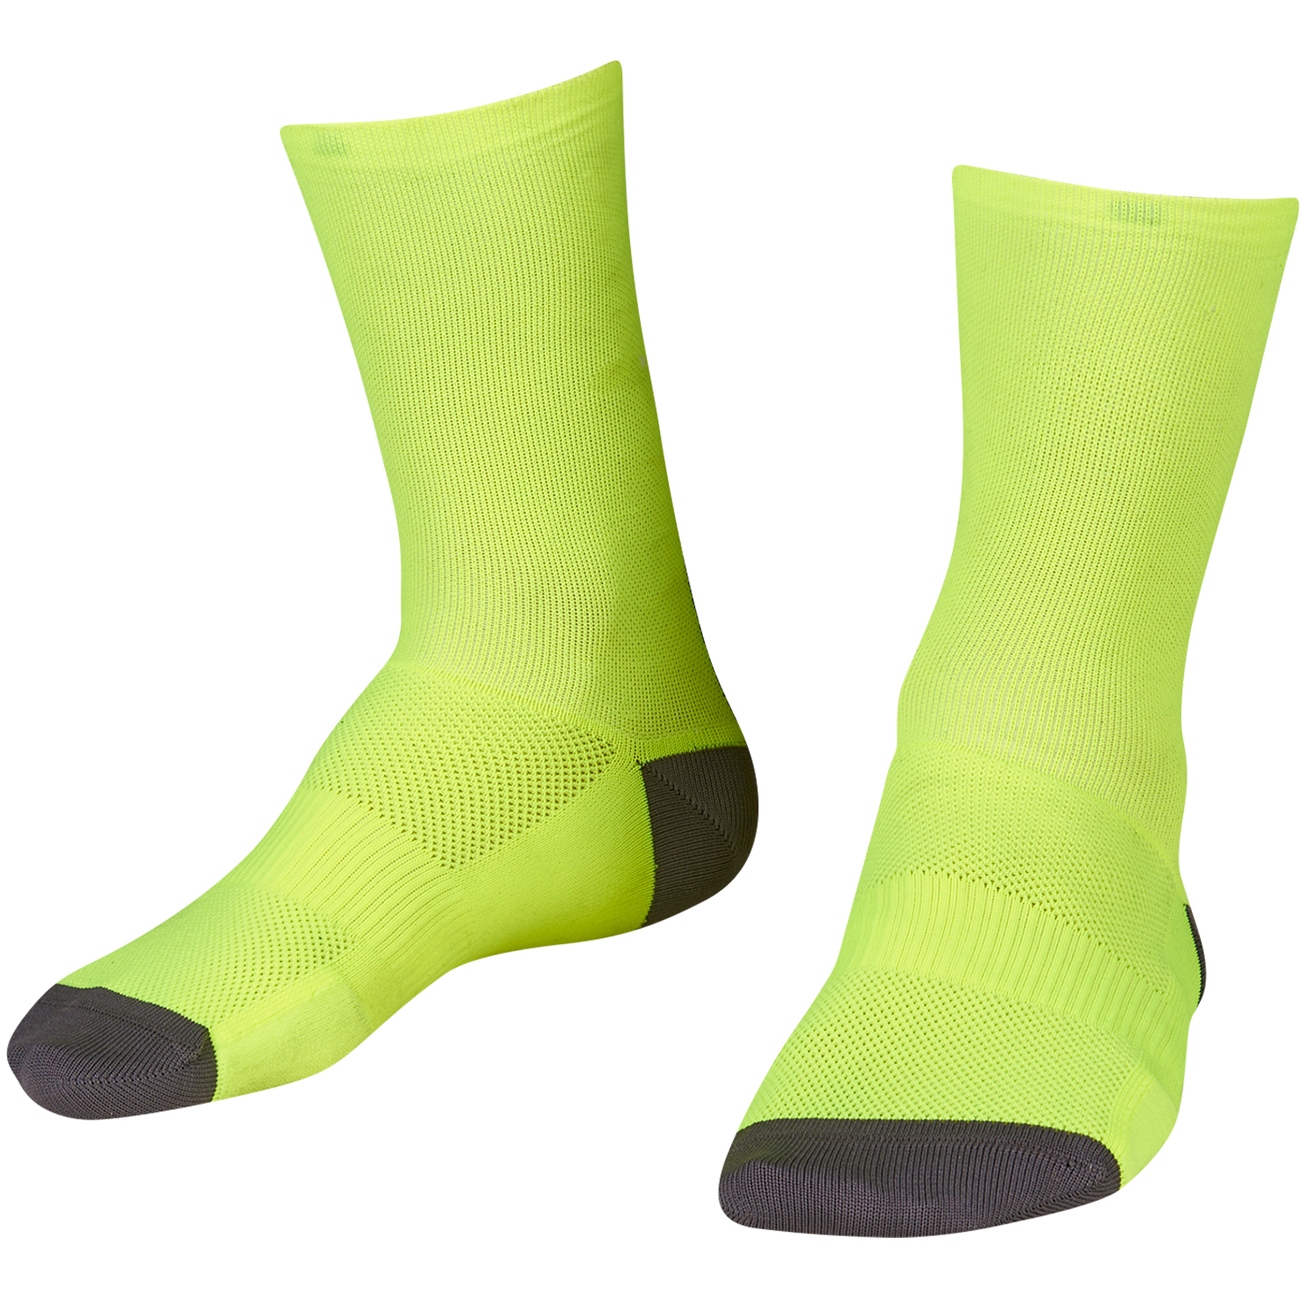 Picture of Bioracer Classic Socks - fluo yellow